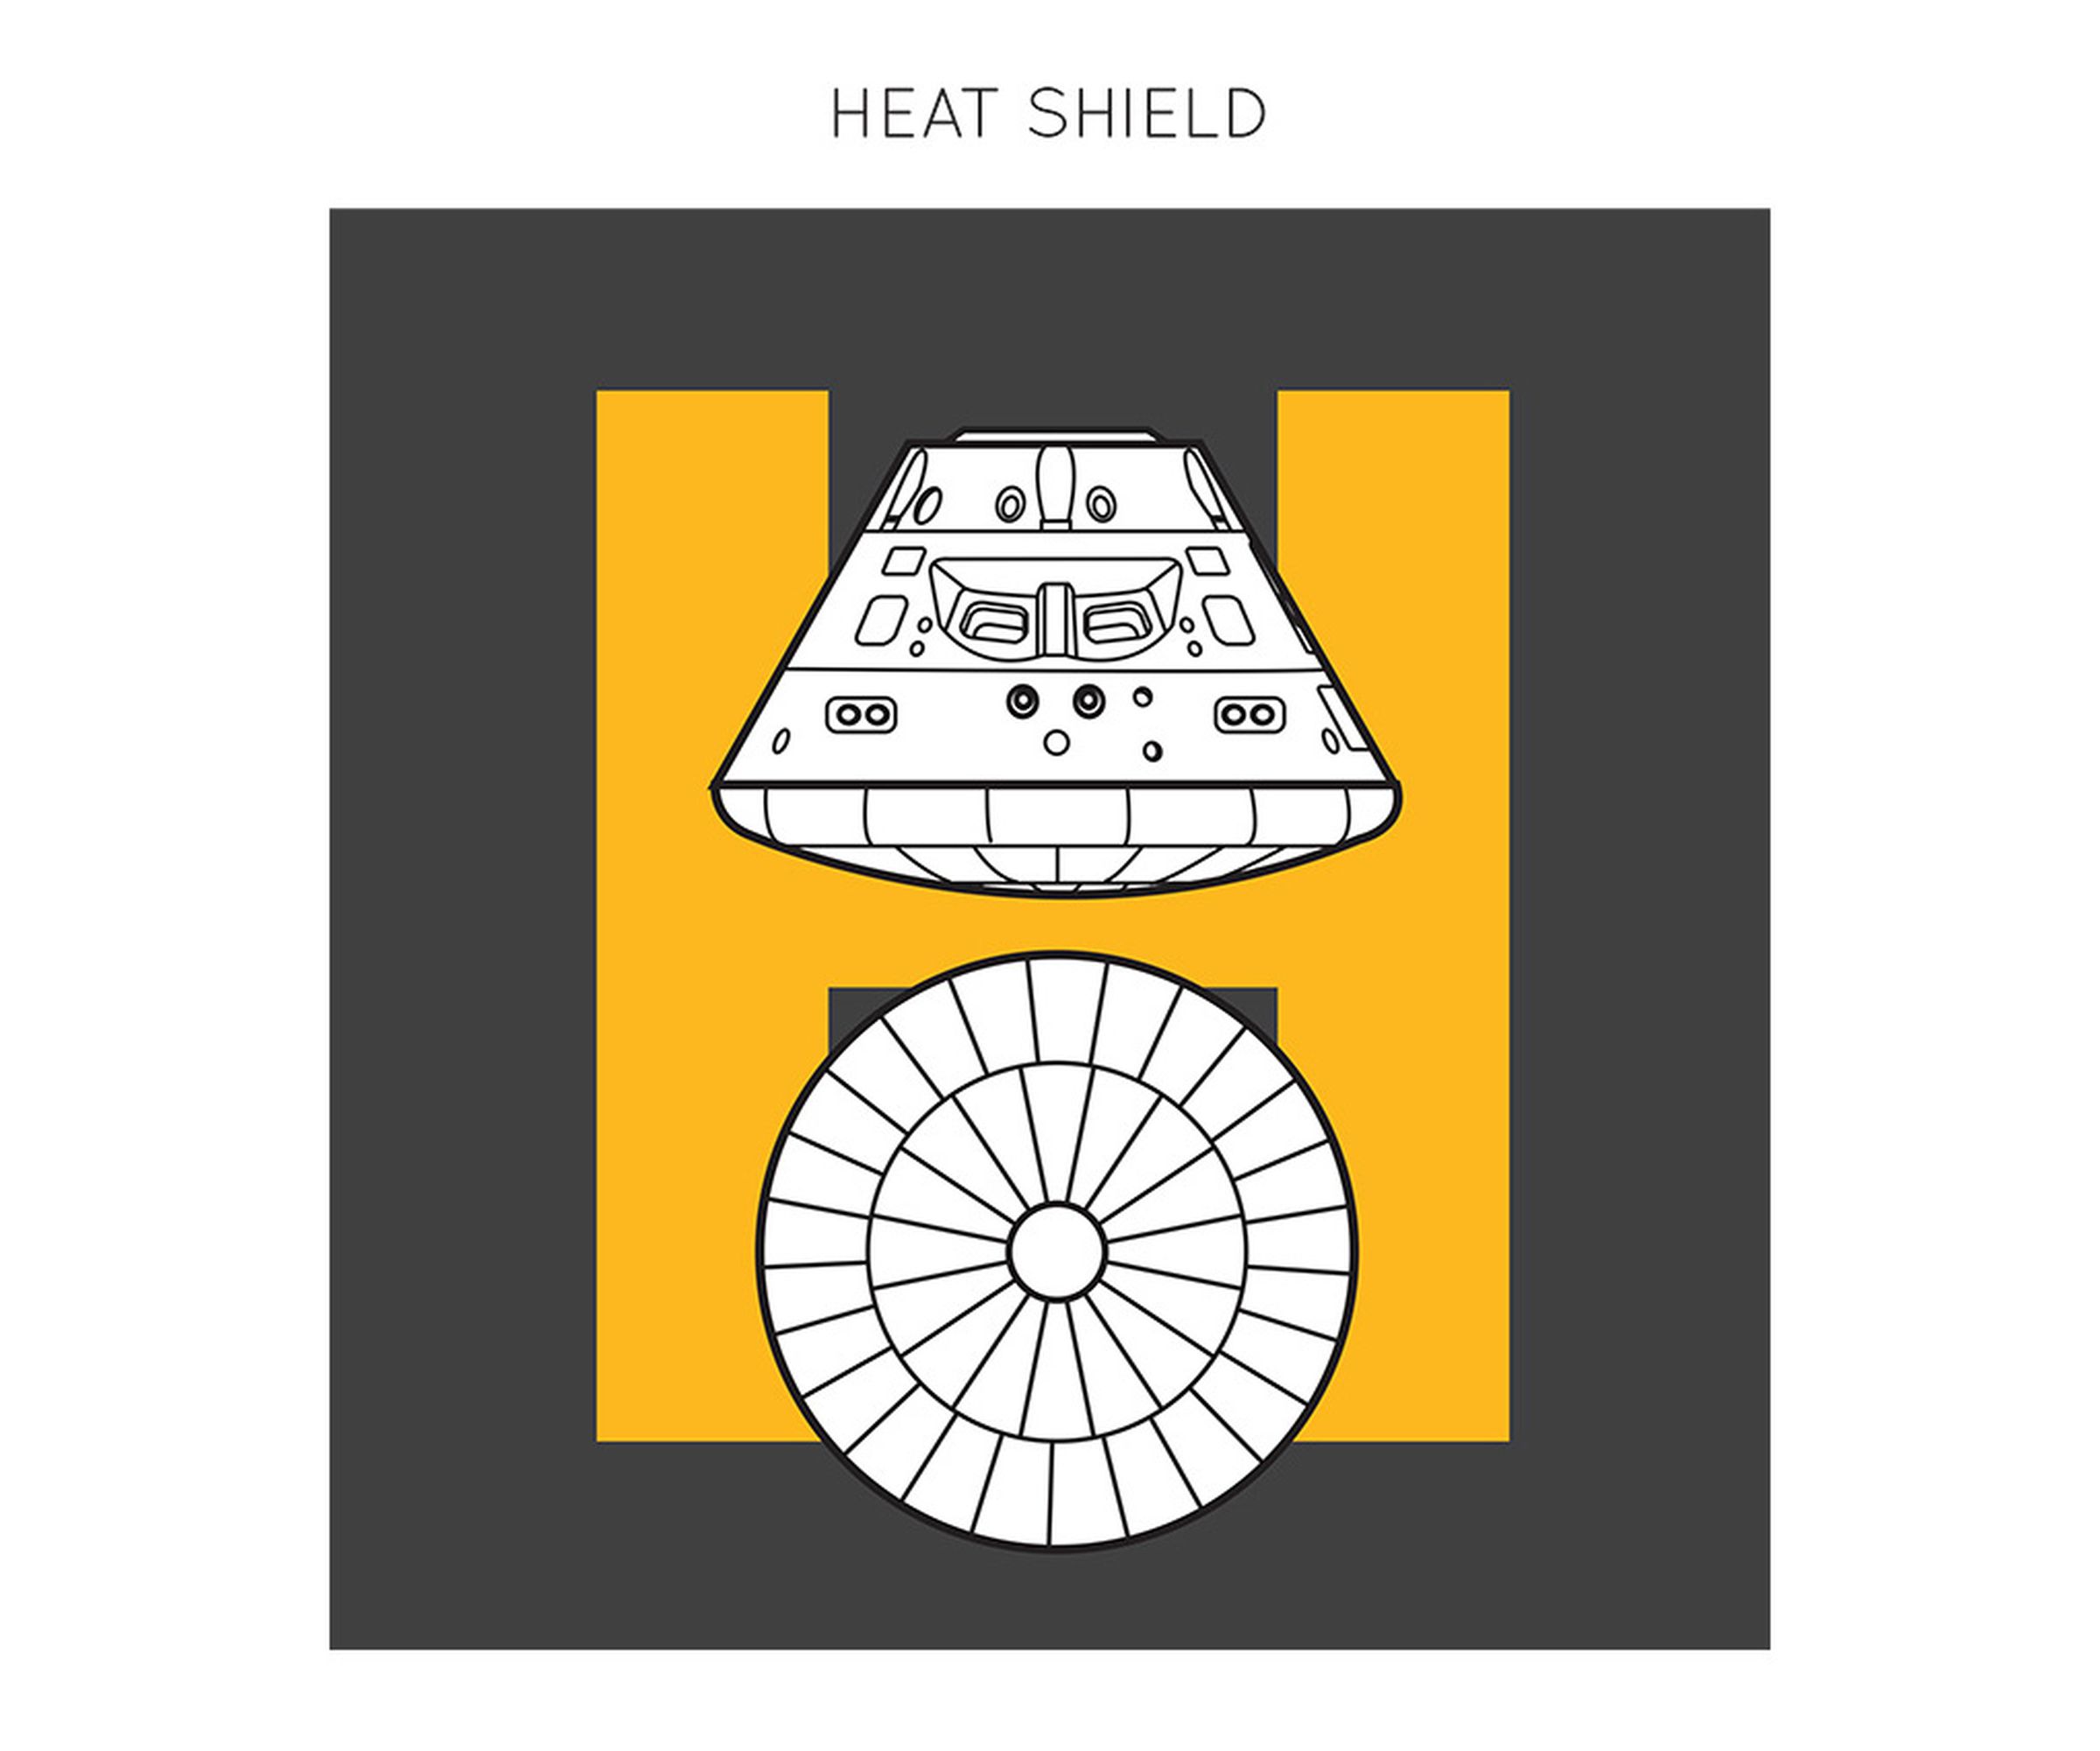 H is for Heat Shield